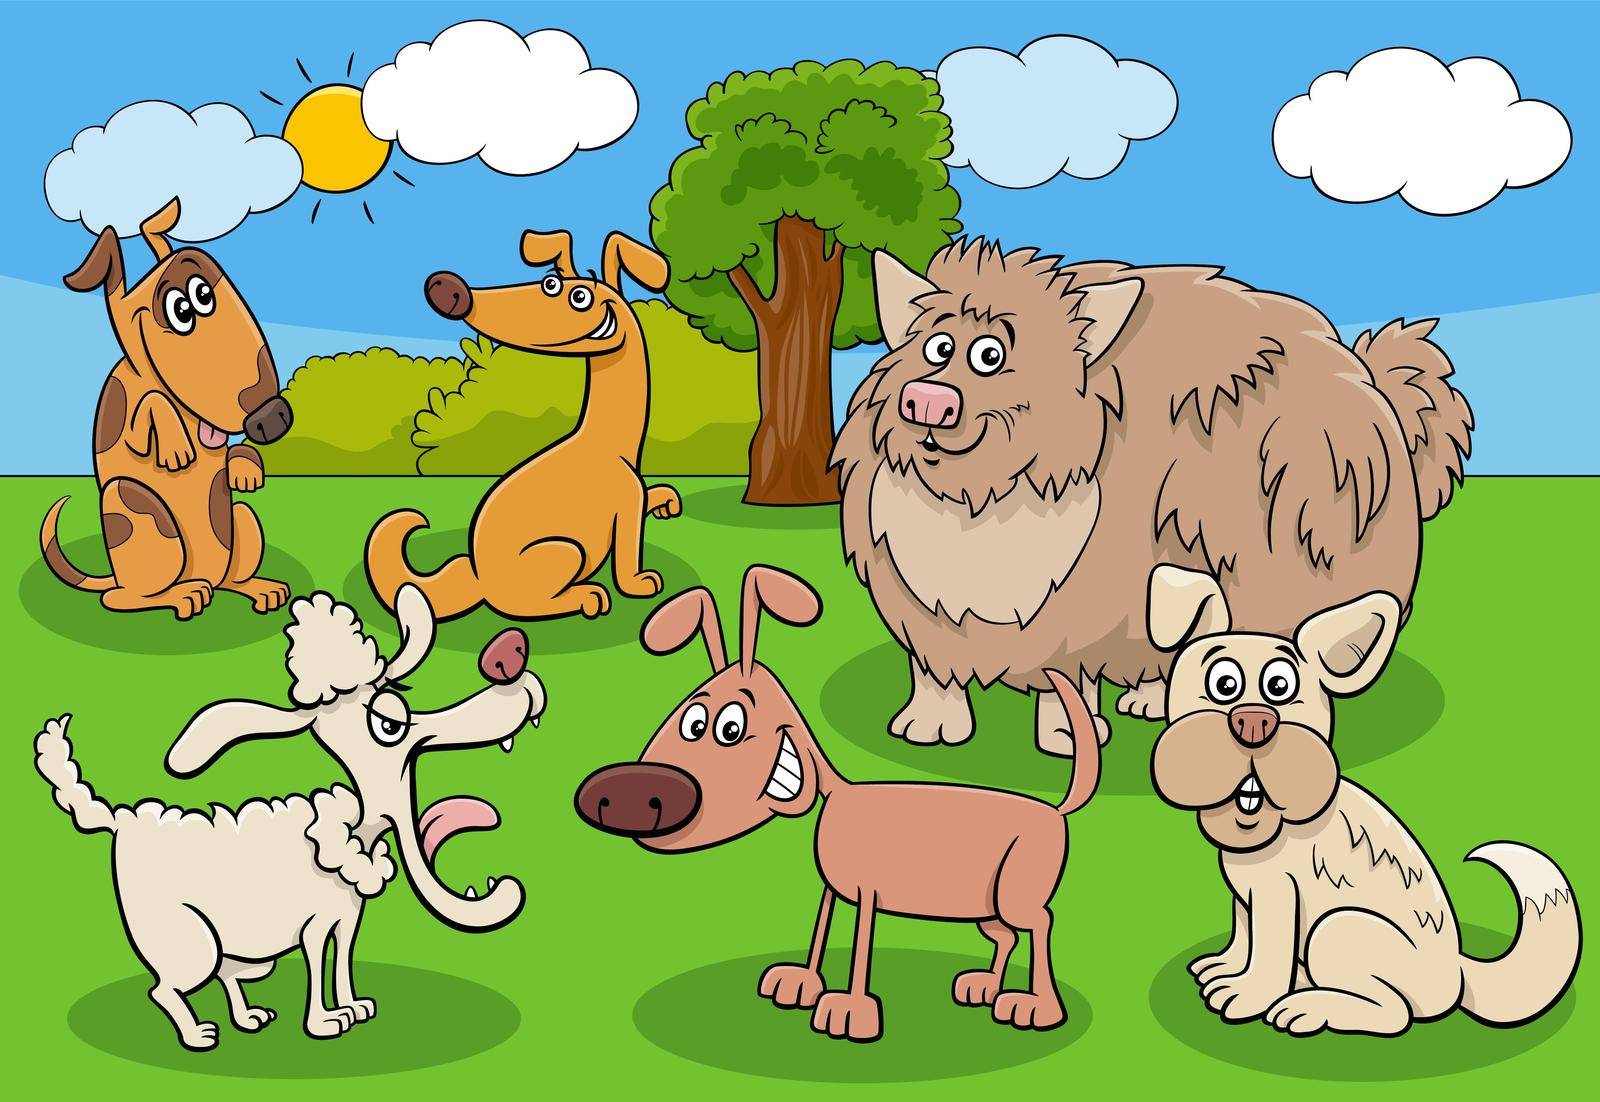 Cartoon illustration of funny dogs and puppies animal characters group